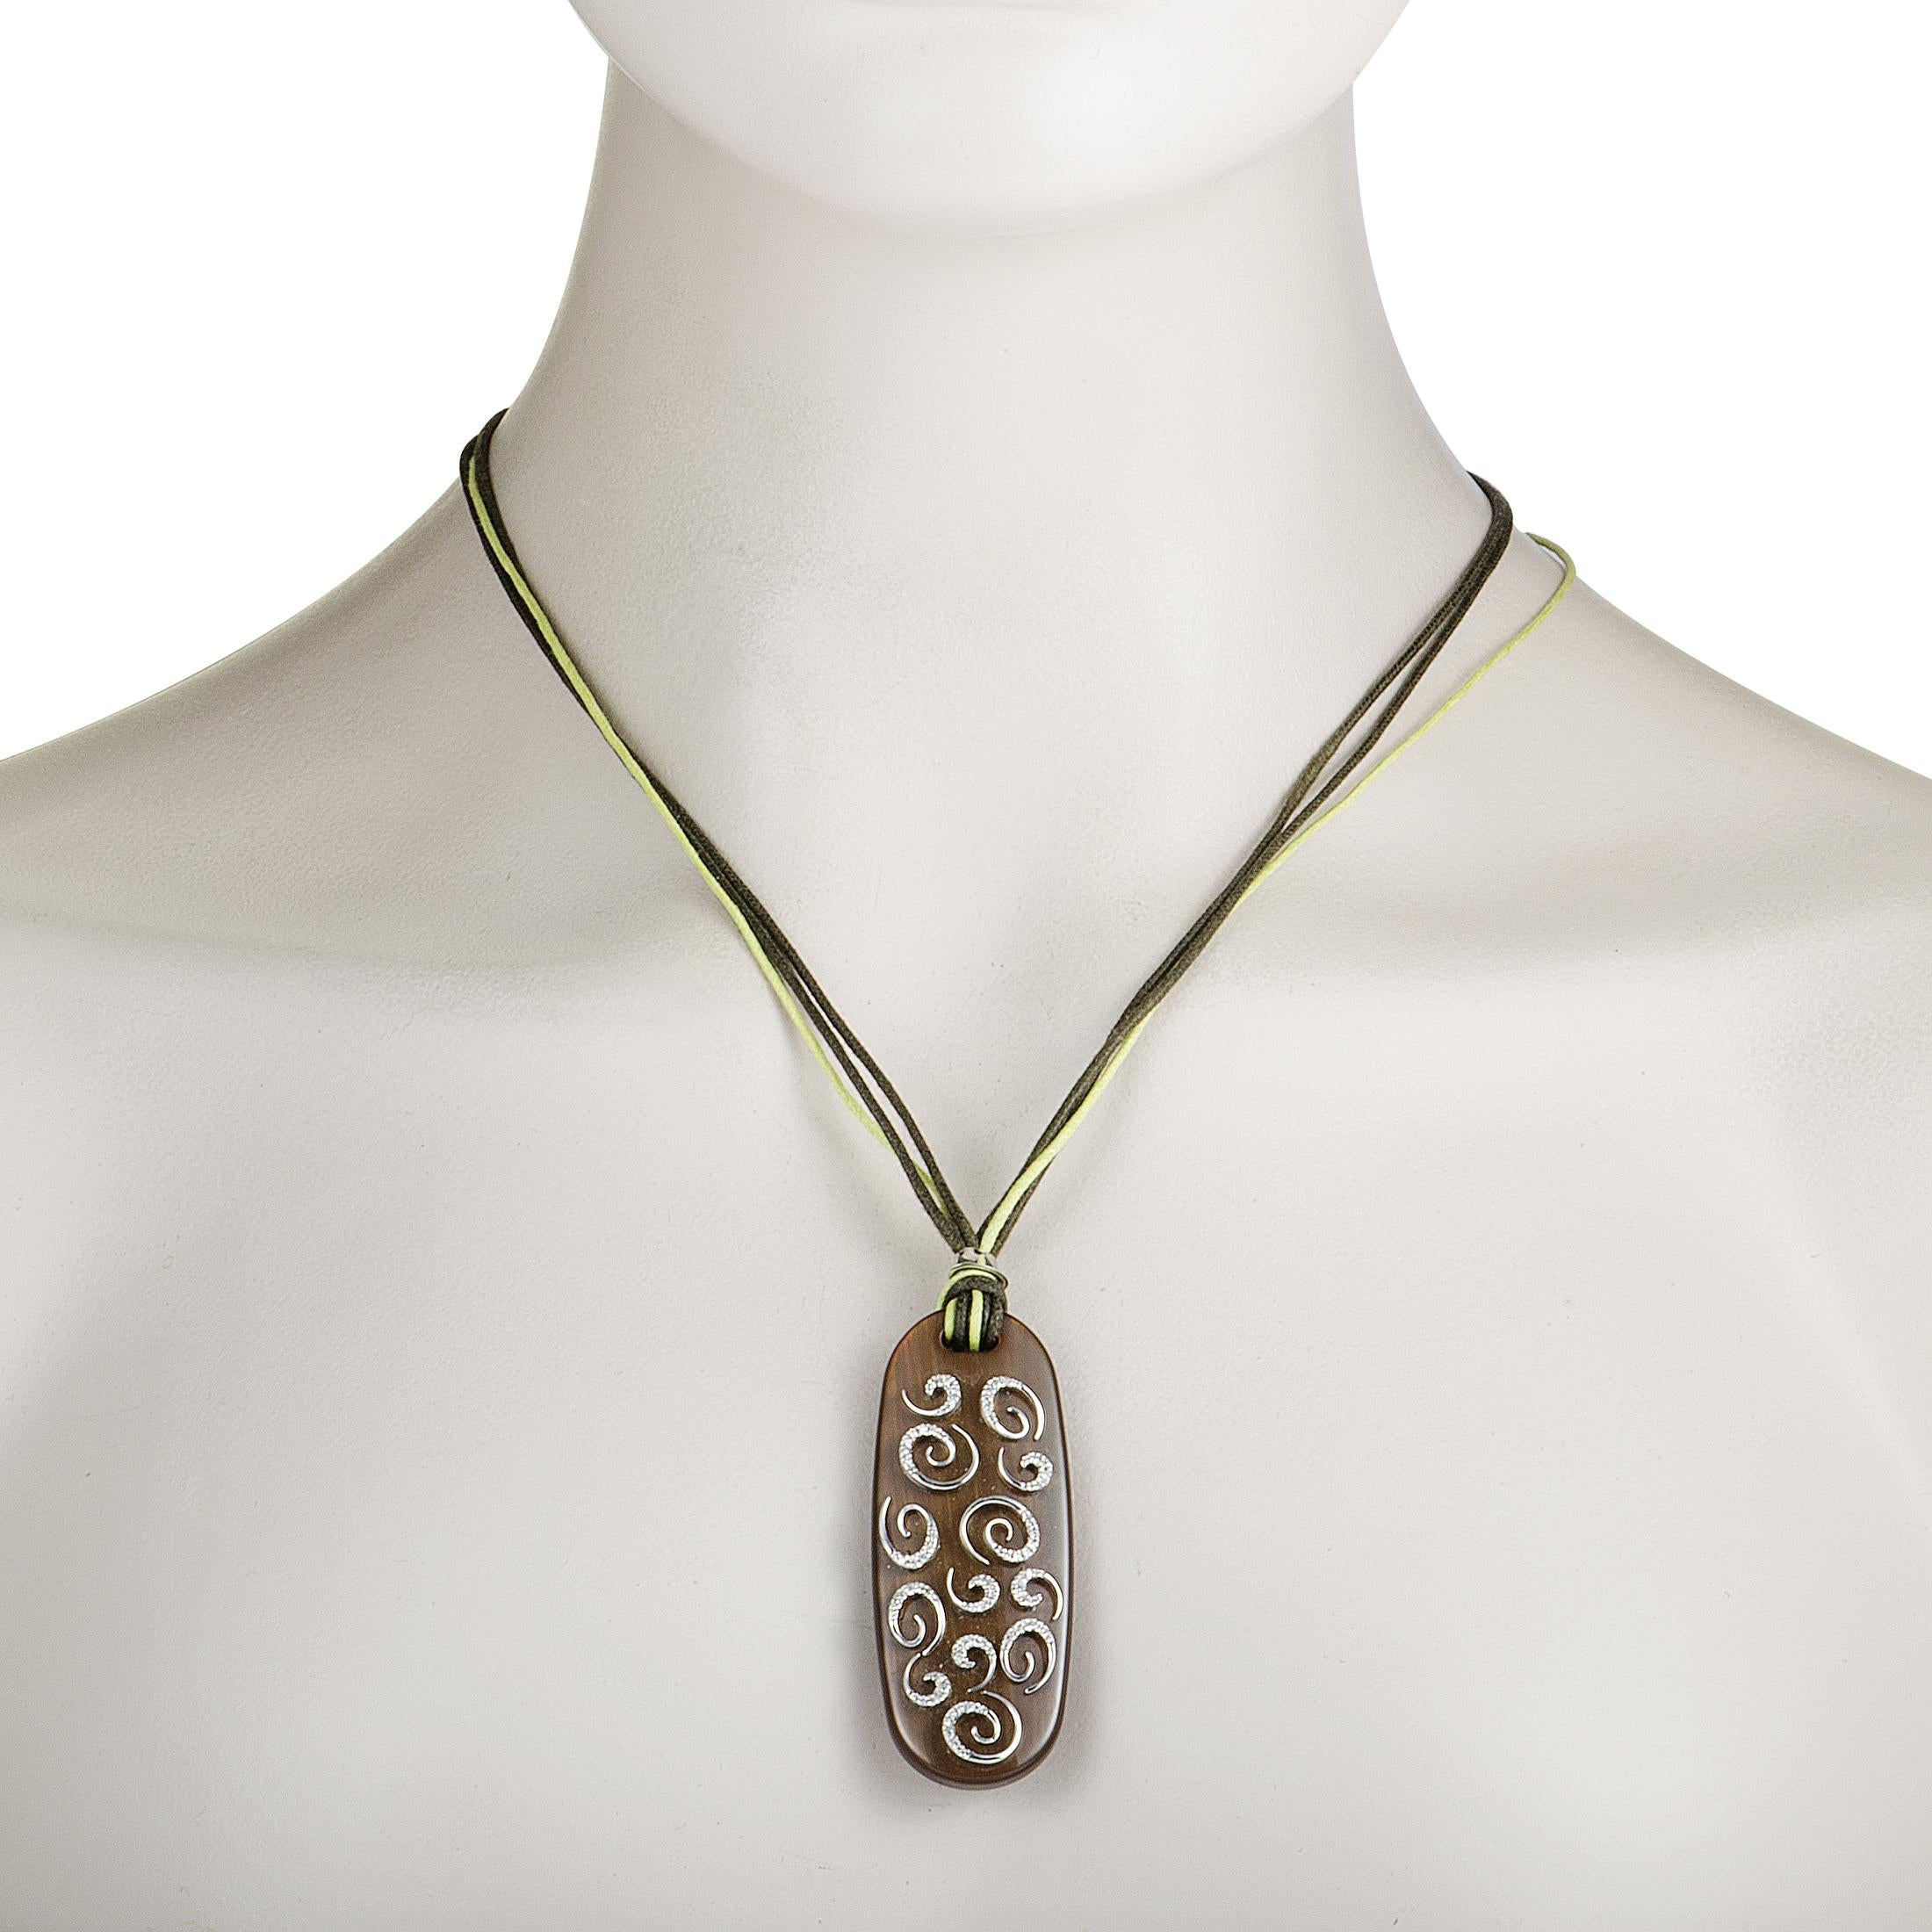 This incredible necklace is like nothing you've seen before! Its stunning pendant is made from shimmering 18K white gold and wood and adorned with dazzling diamonds.
